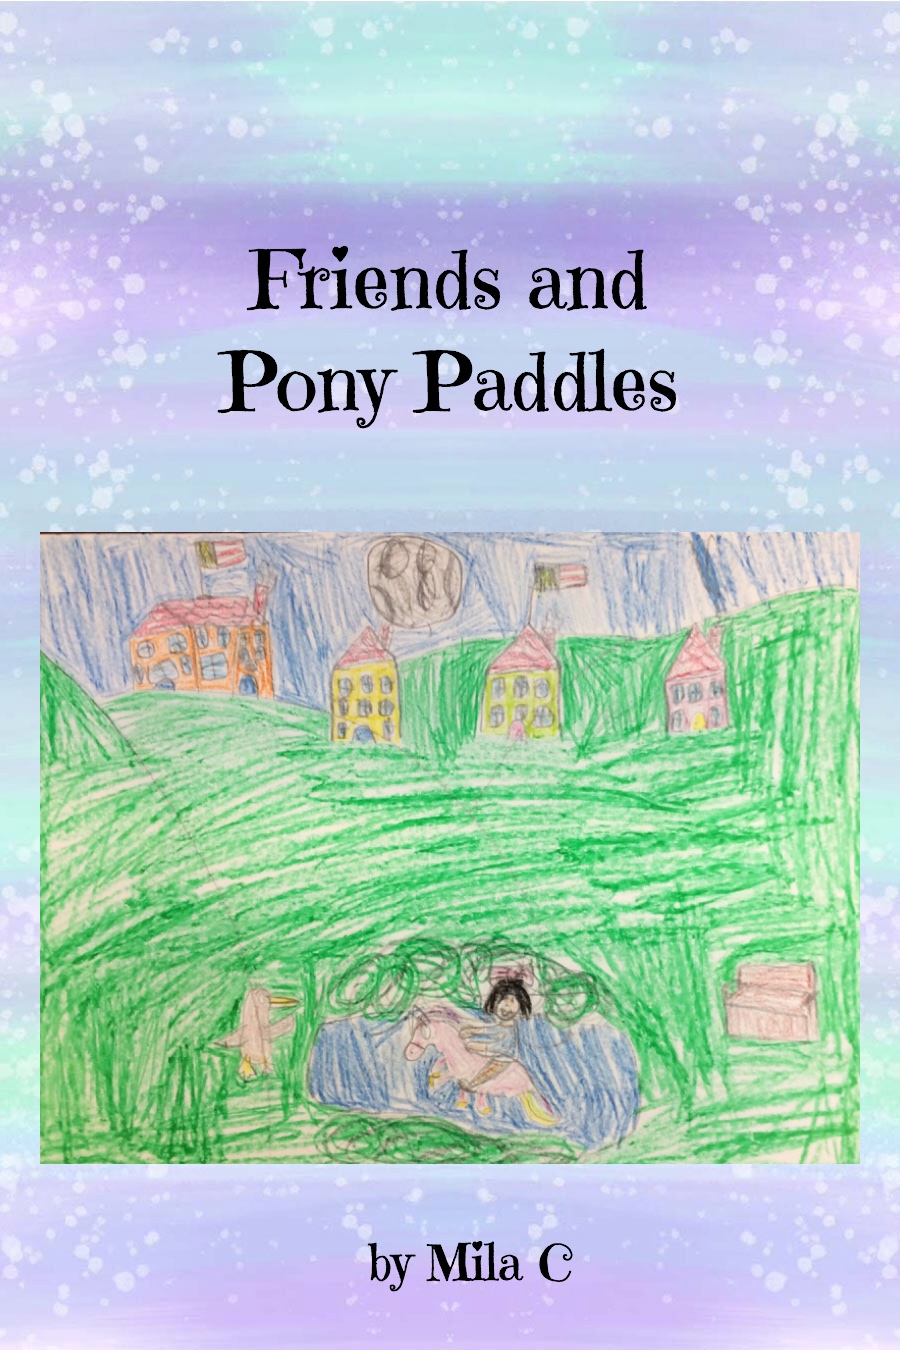 Friends and Pony Paddles by Mila C